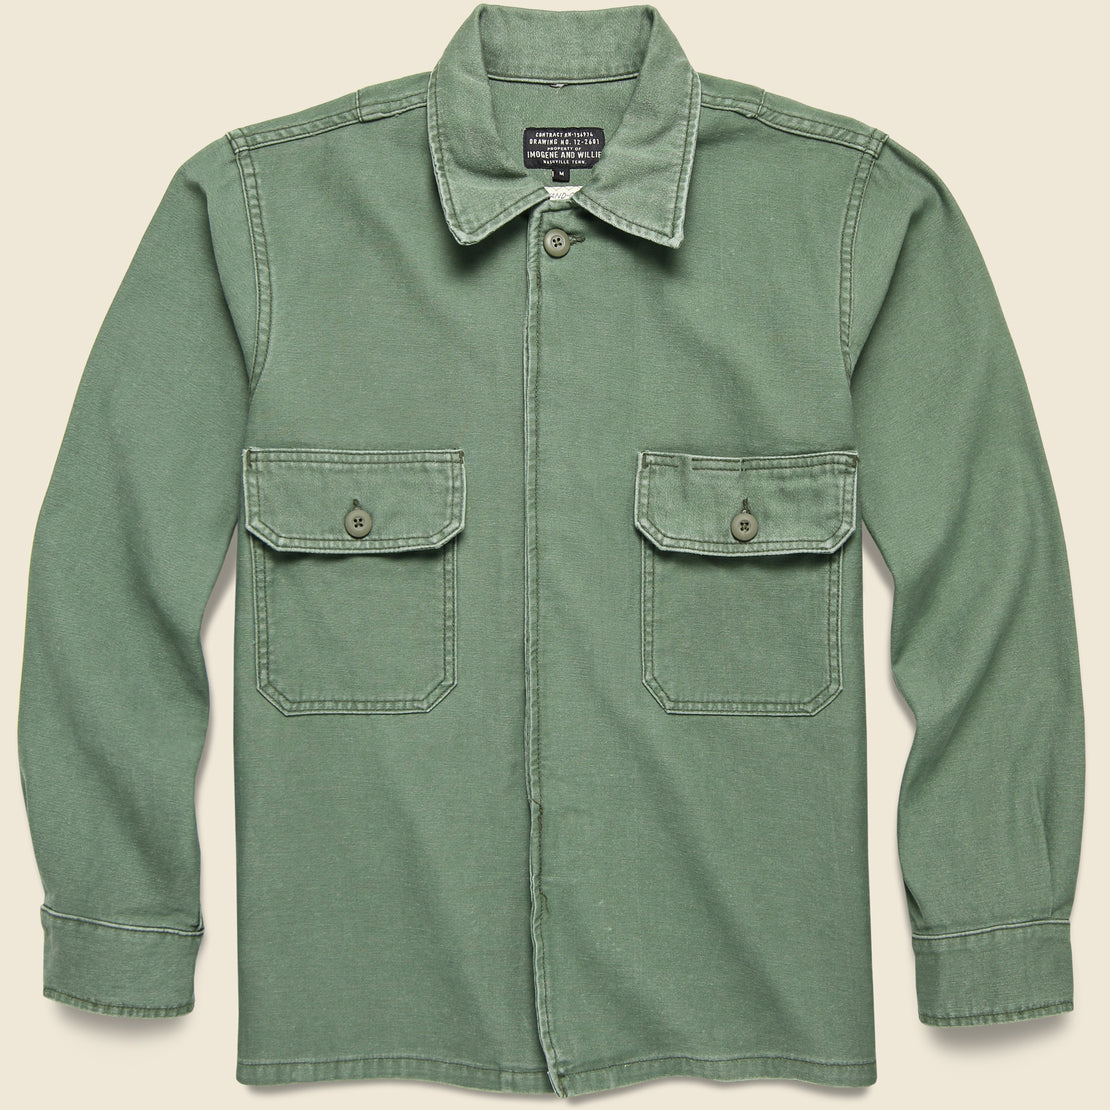 Military Shirt Jacket - Quilt Squares